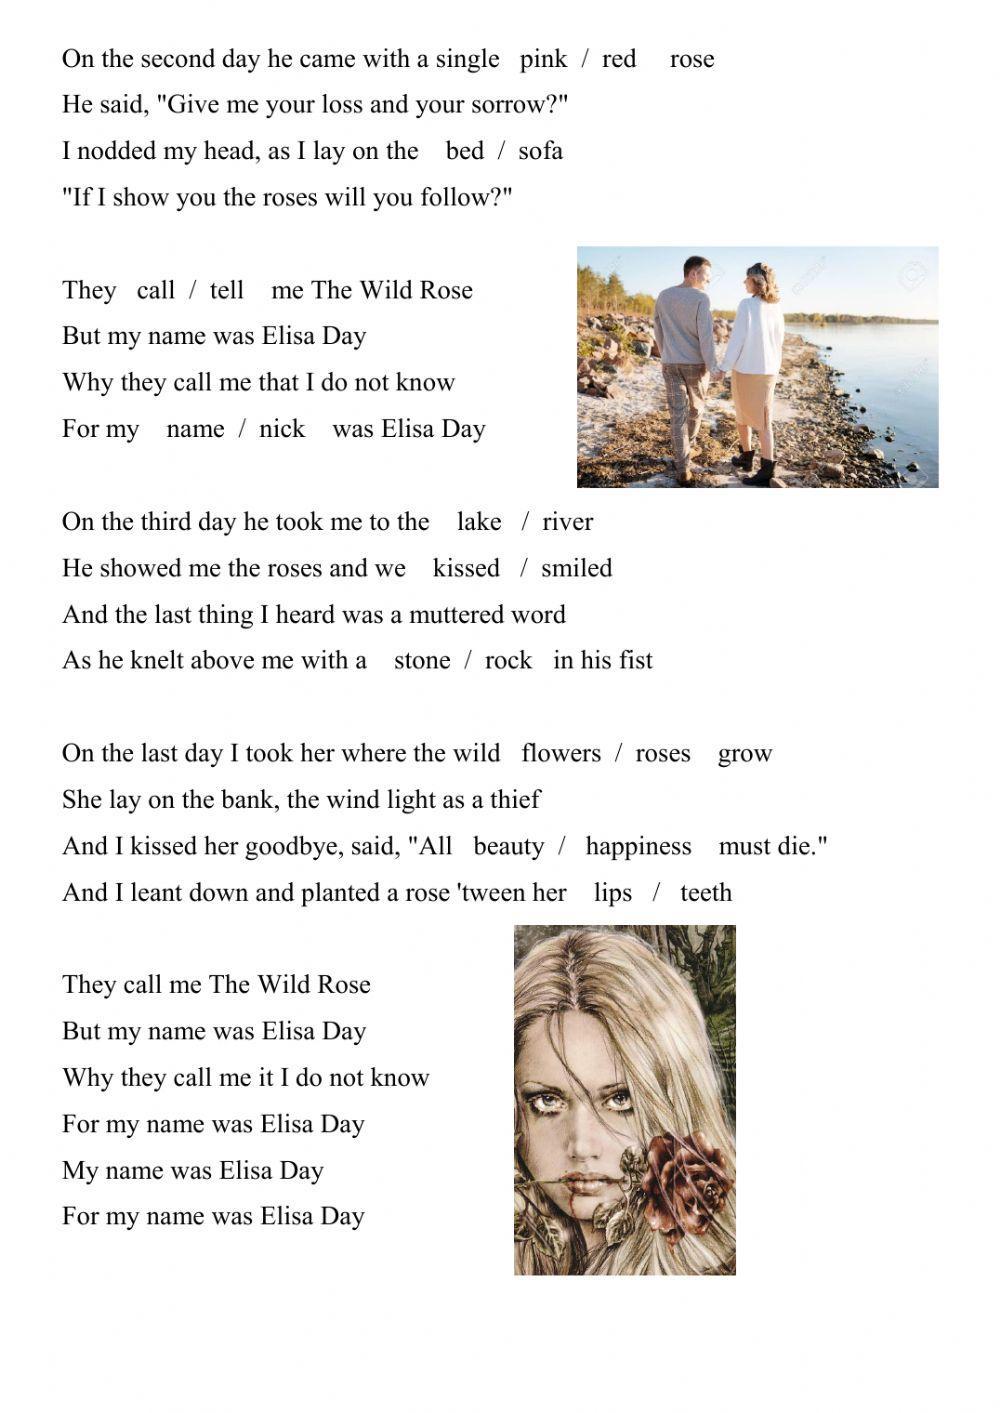 Song - Where the wild roses grow